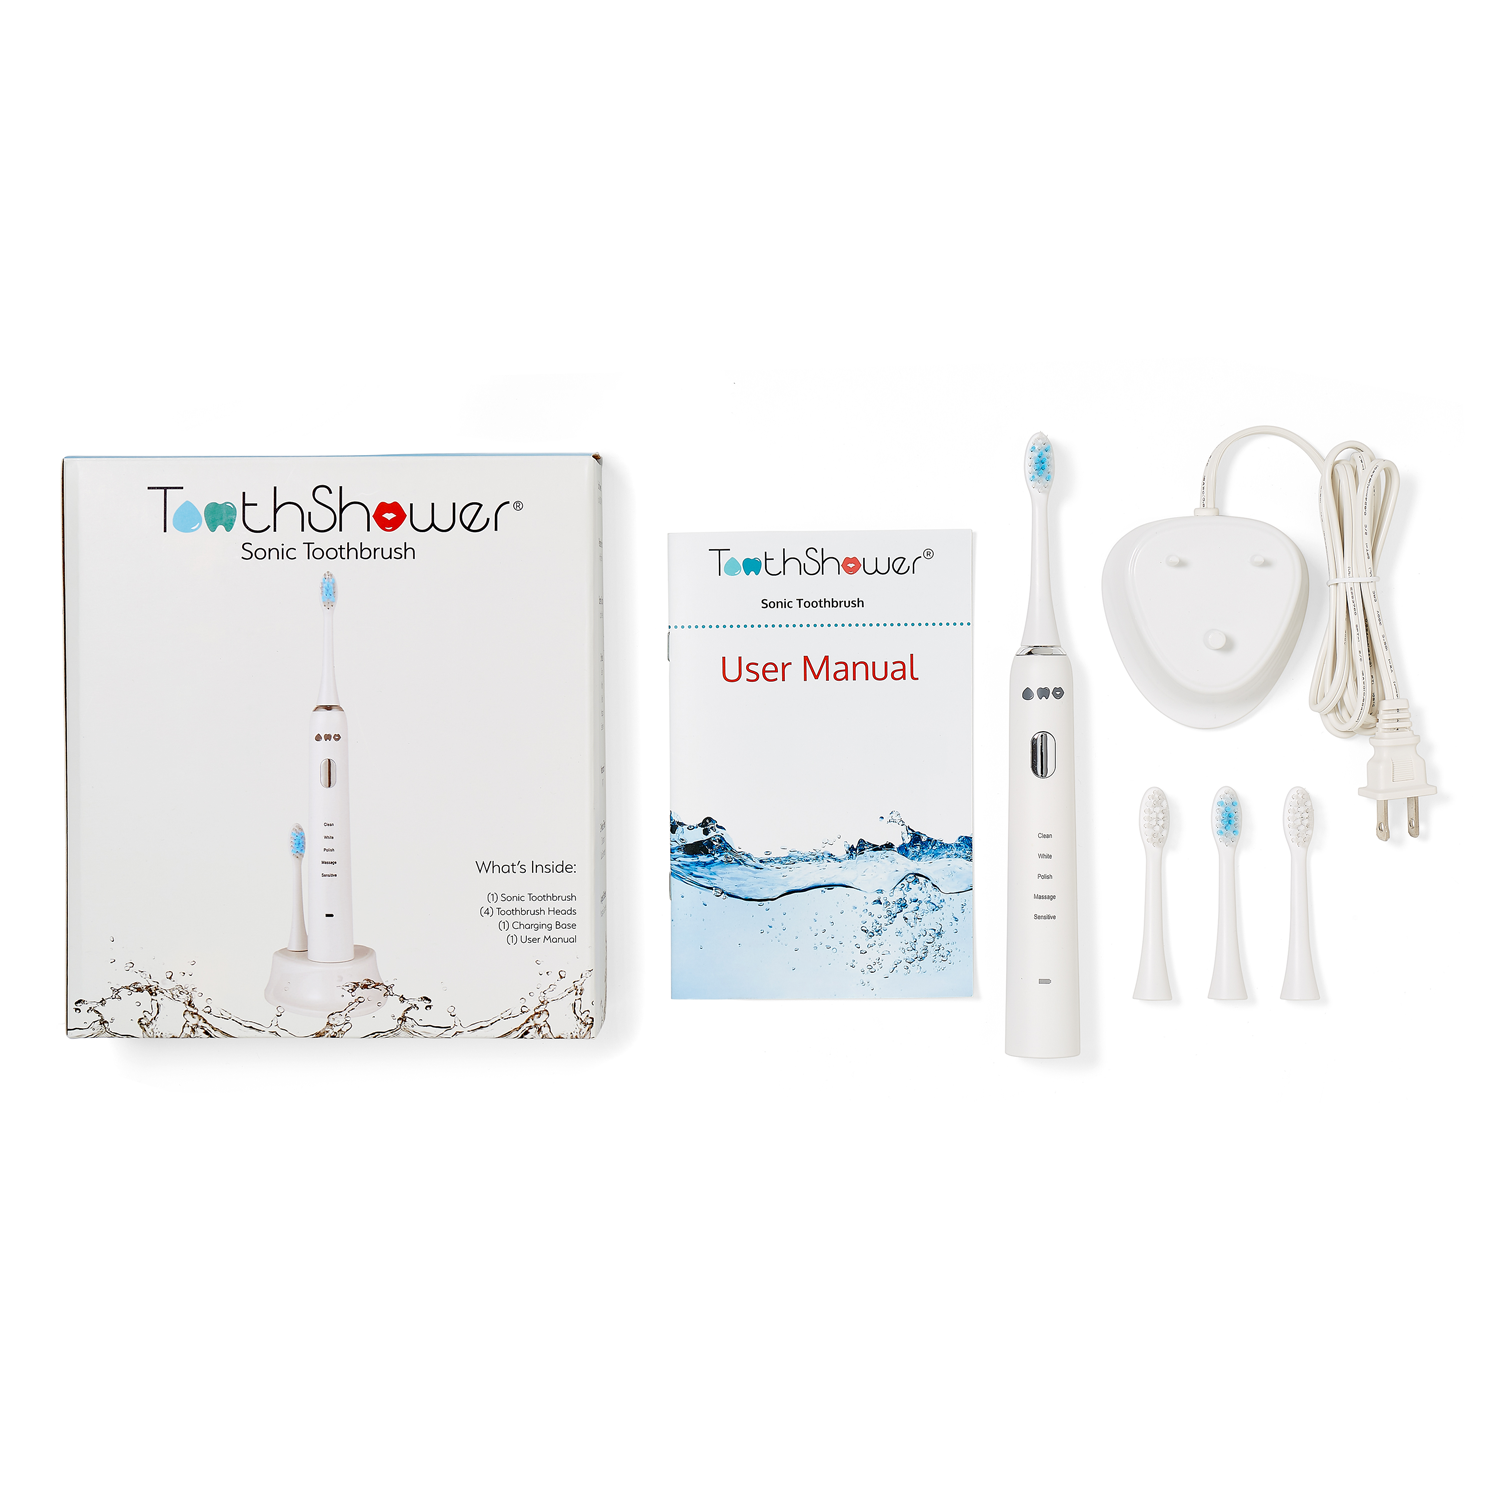 sonic toothbrush for two users, four sonic tooth brush head blue and white 